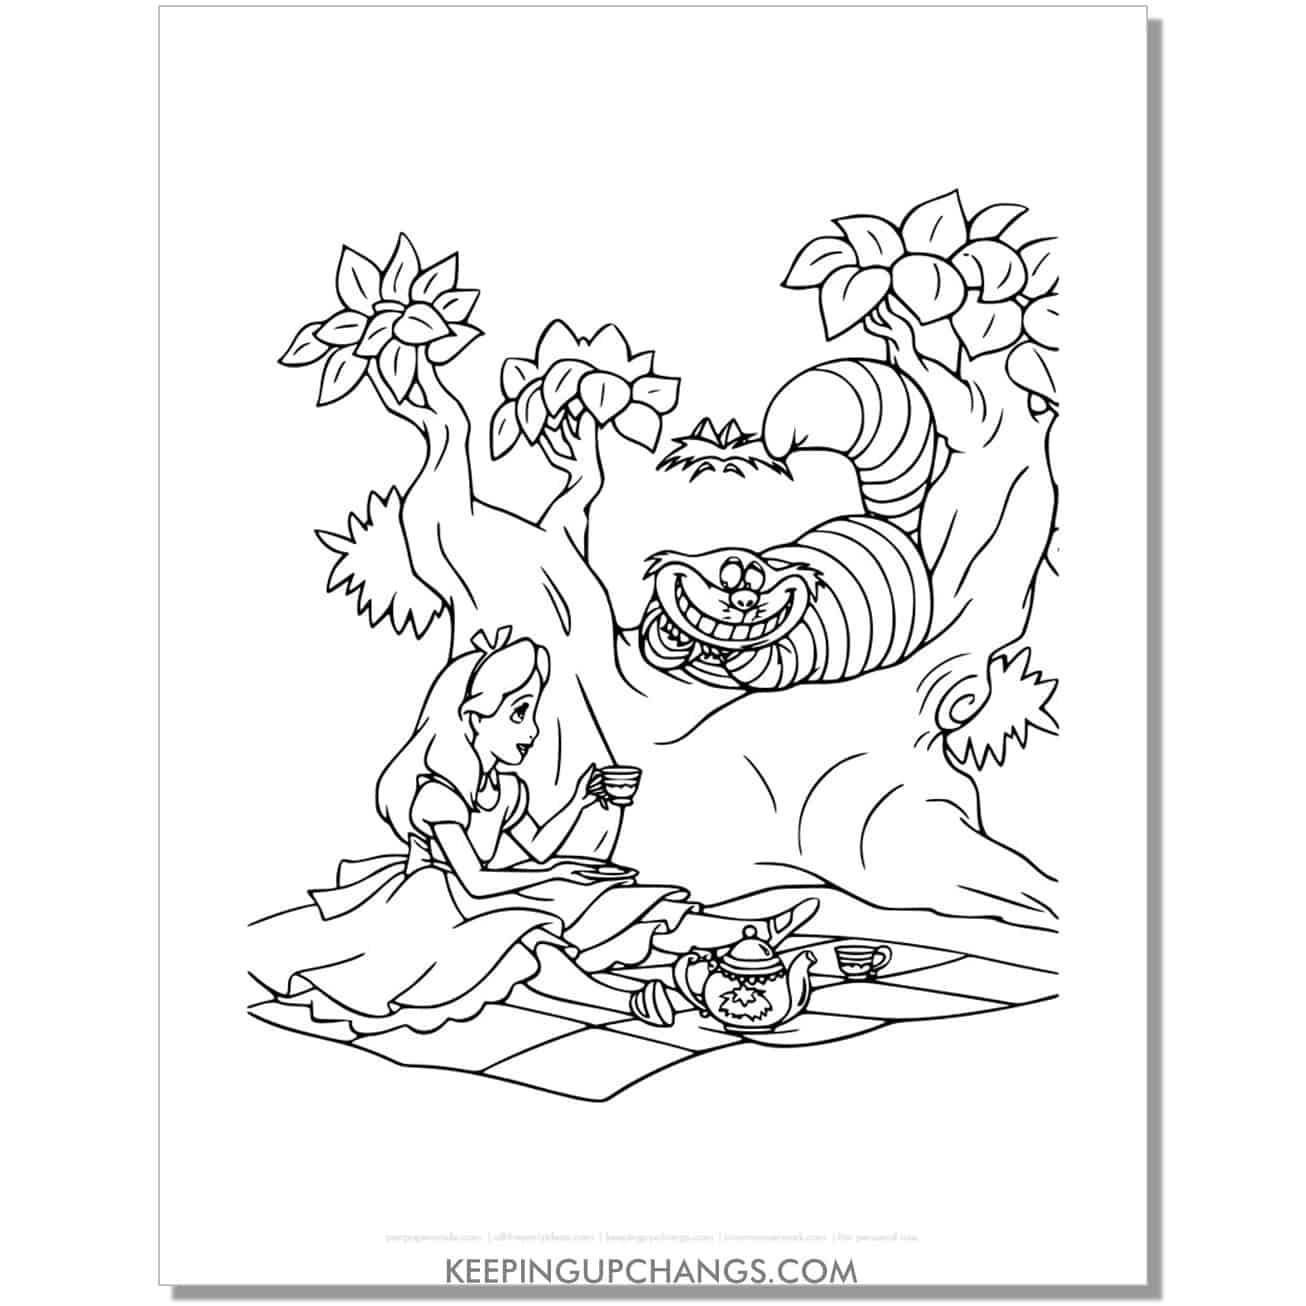 alice in wonderland having picnic with chesire cat coloring page, sheet.